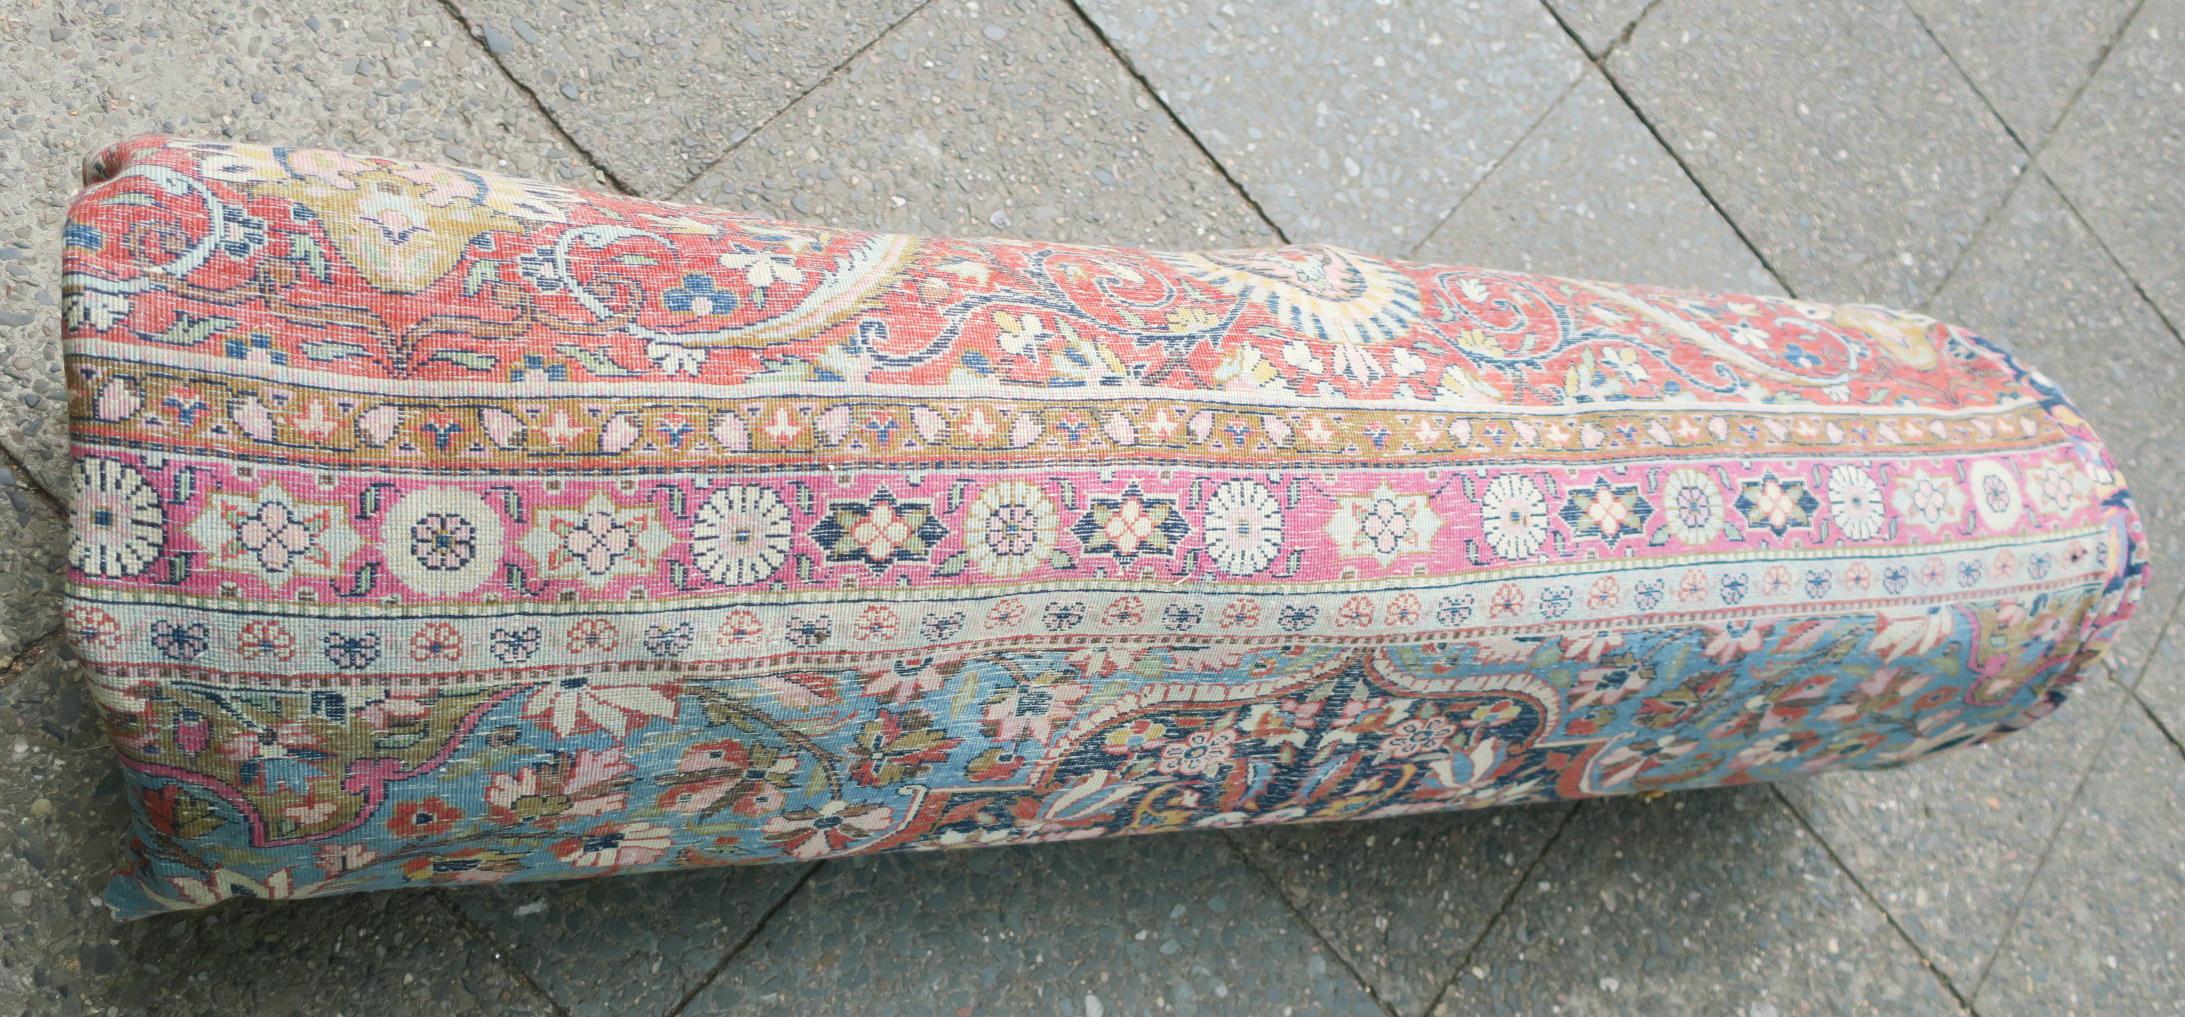 Large Isfahan Carpet, Early 20th Century im Zustand „Gut“ im Angebot in Berlin, DE